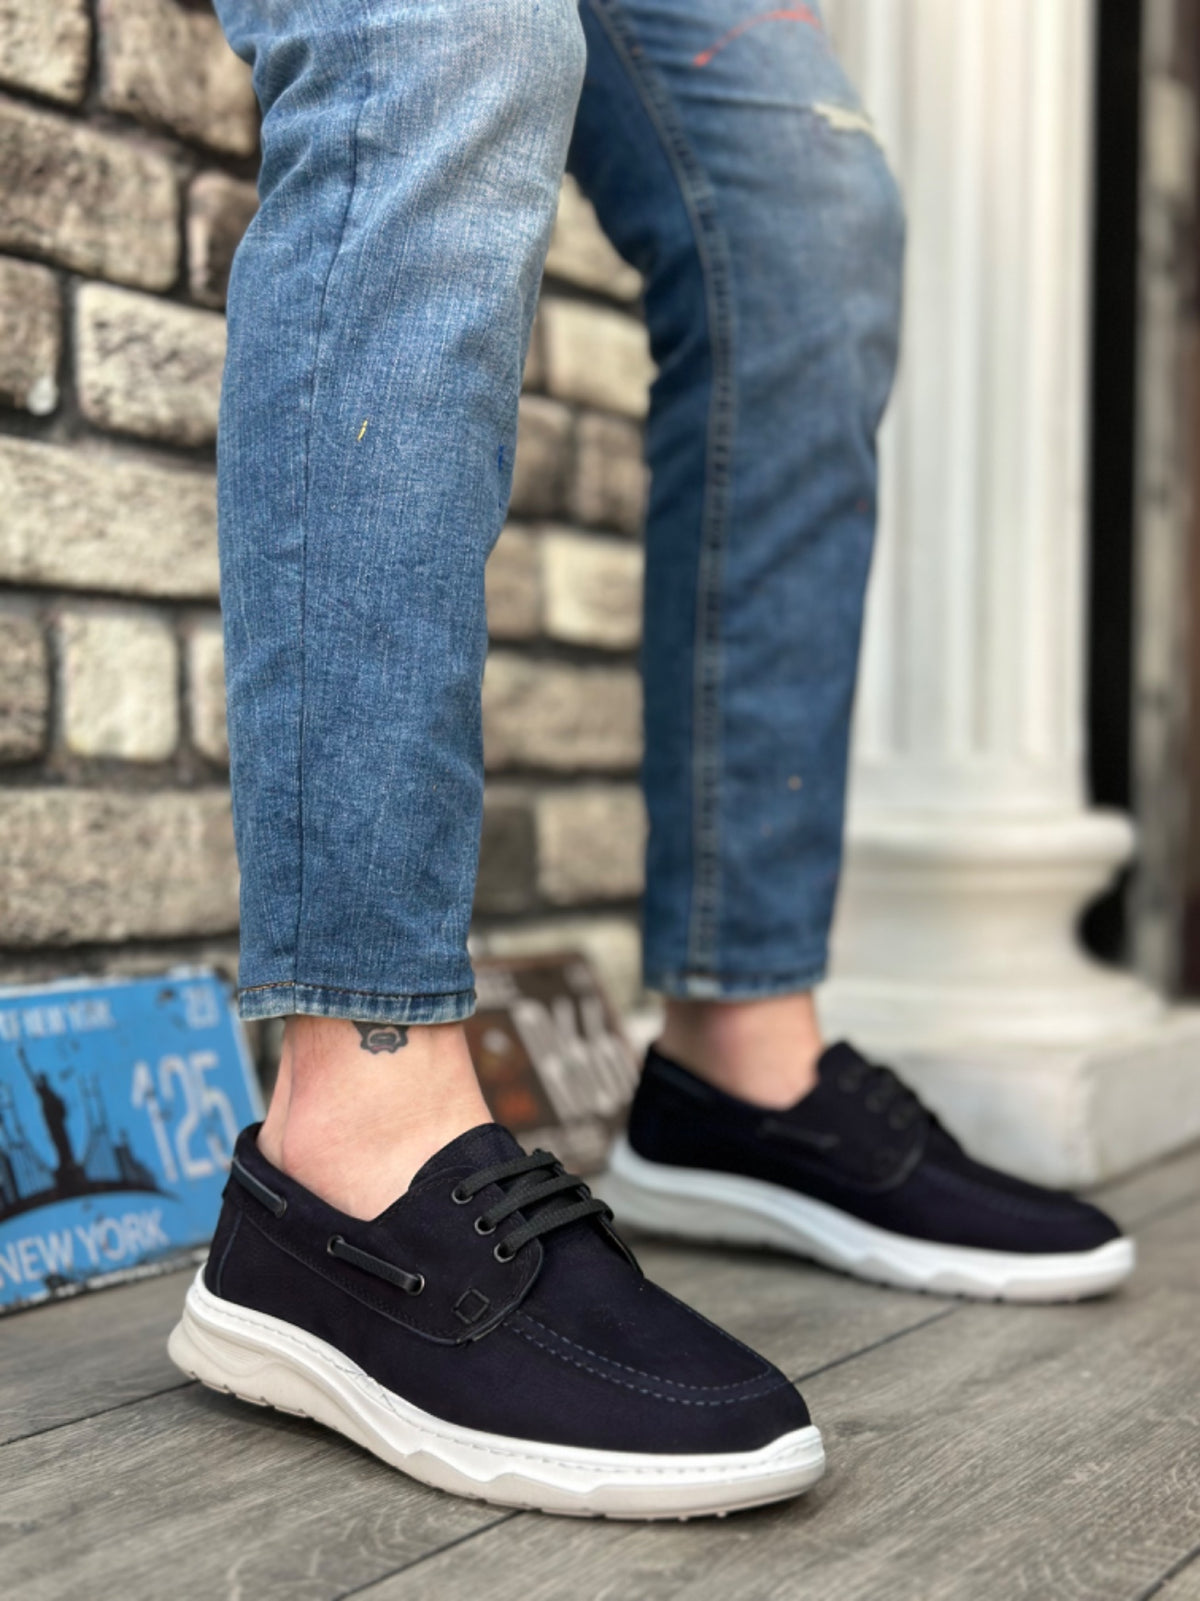 BA0337 Genuine Nubuck Leather Inside and Outside Classic Navy Blue Casual Men's Shoes - STREETMODE™